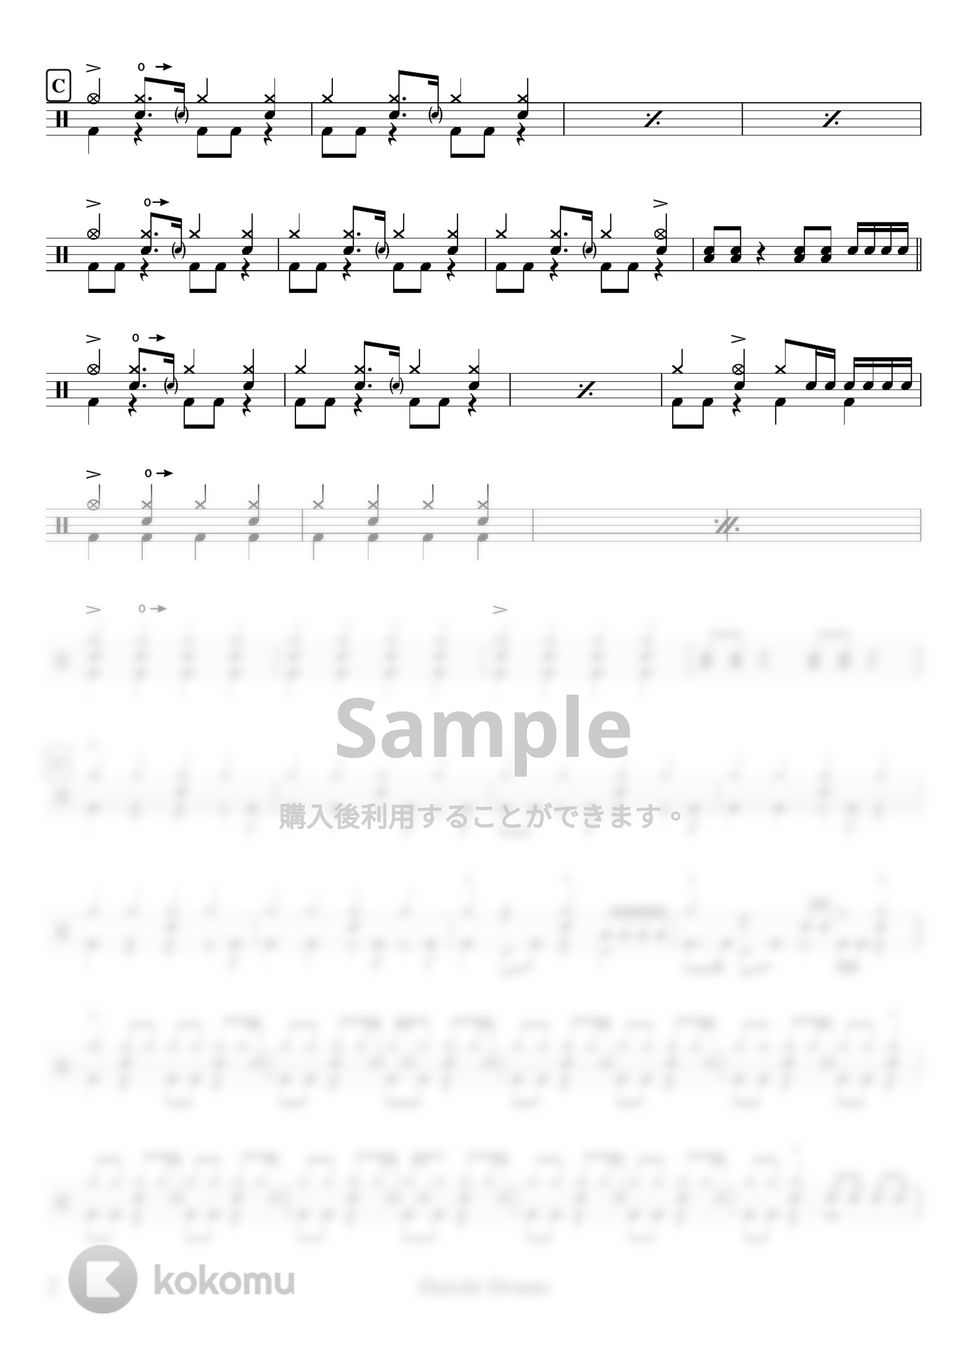 Mrs.GREEN APPLE - インフェルノ by Daichi Drums